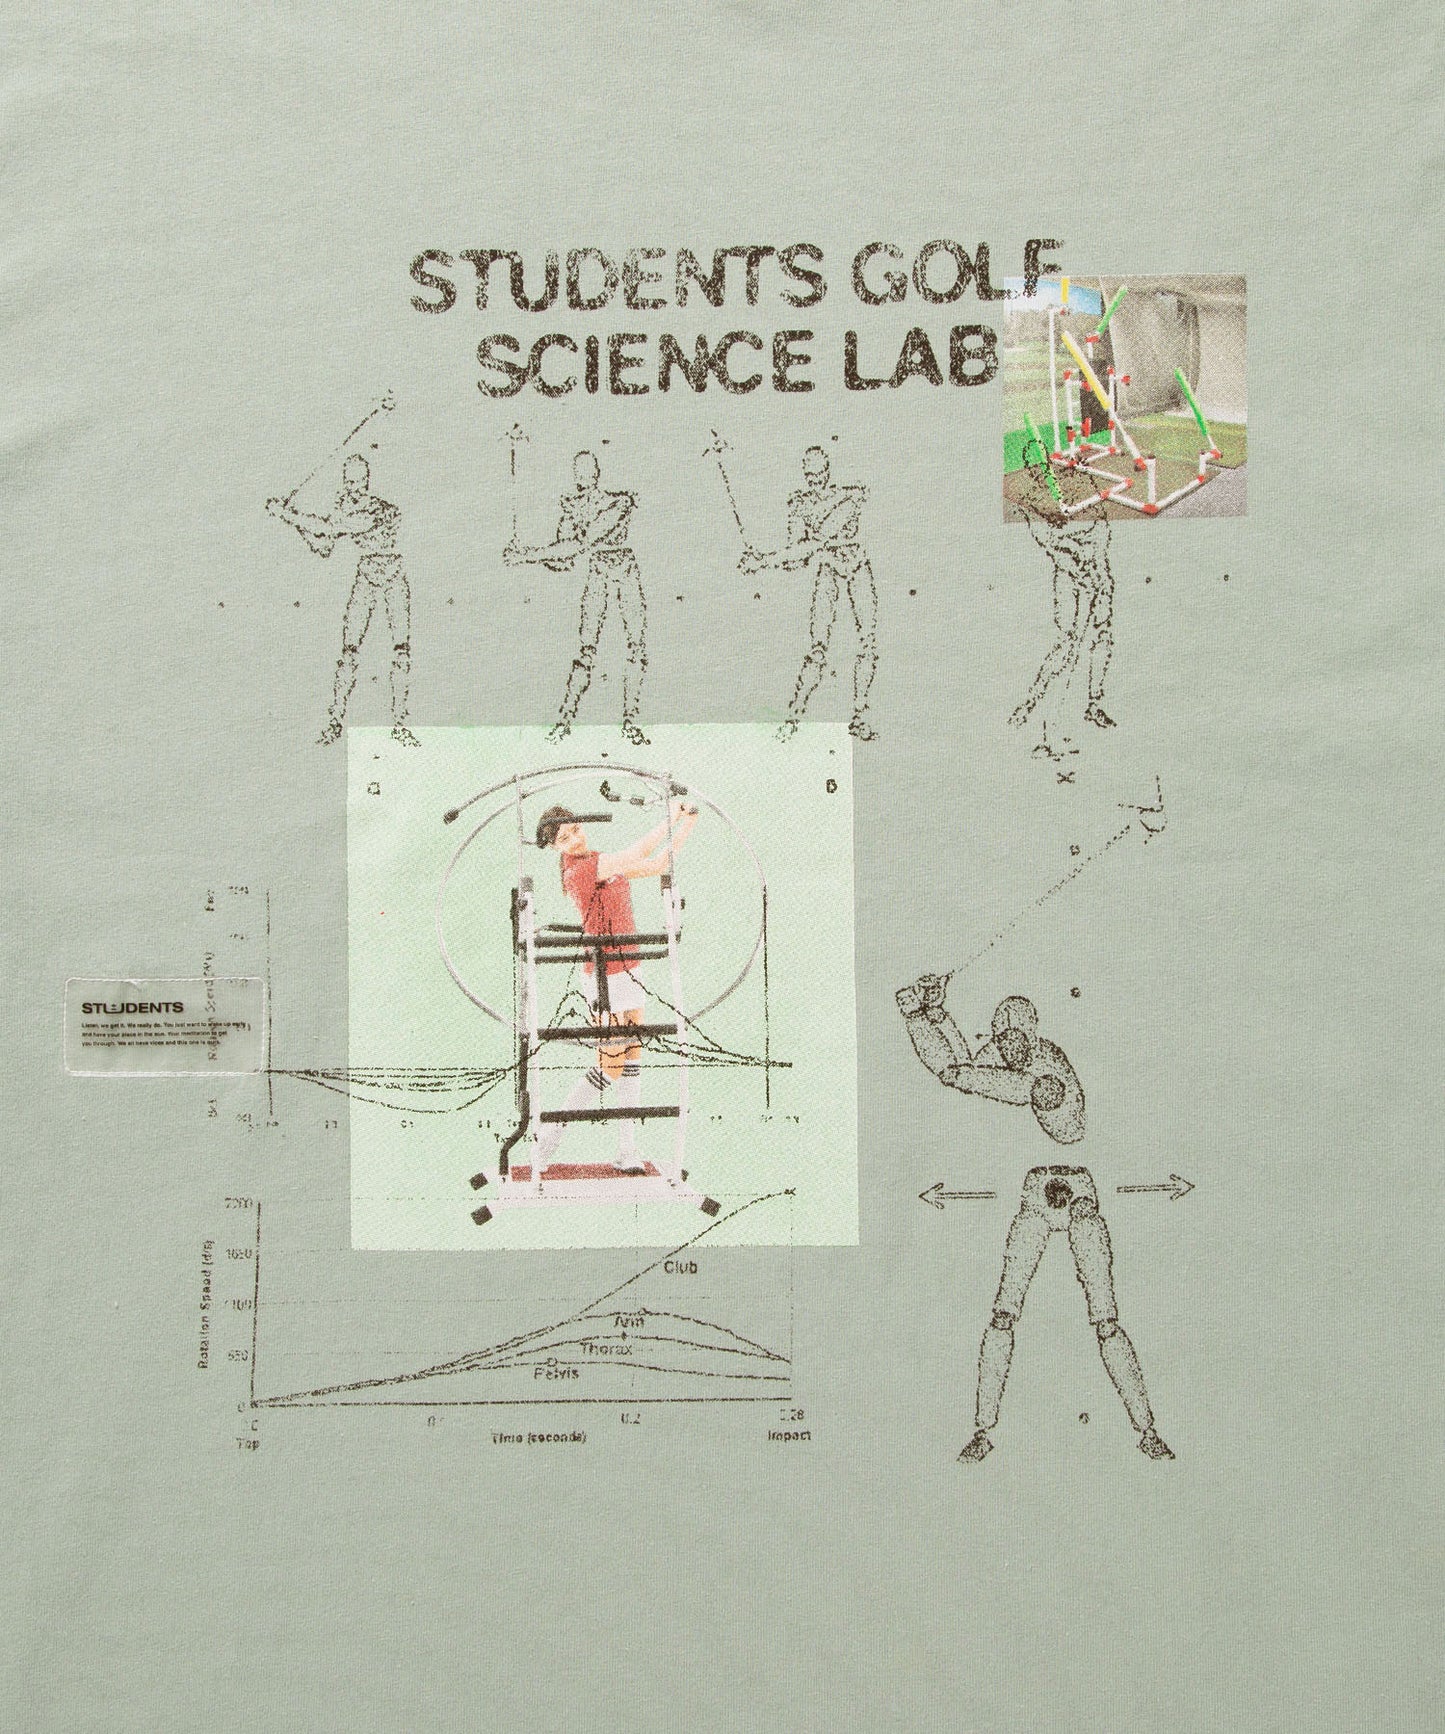 Students Golf Science Lab T-shirt MOSS GREEN